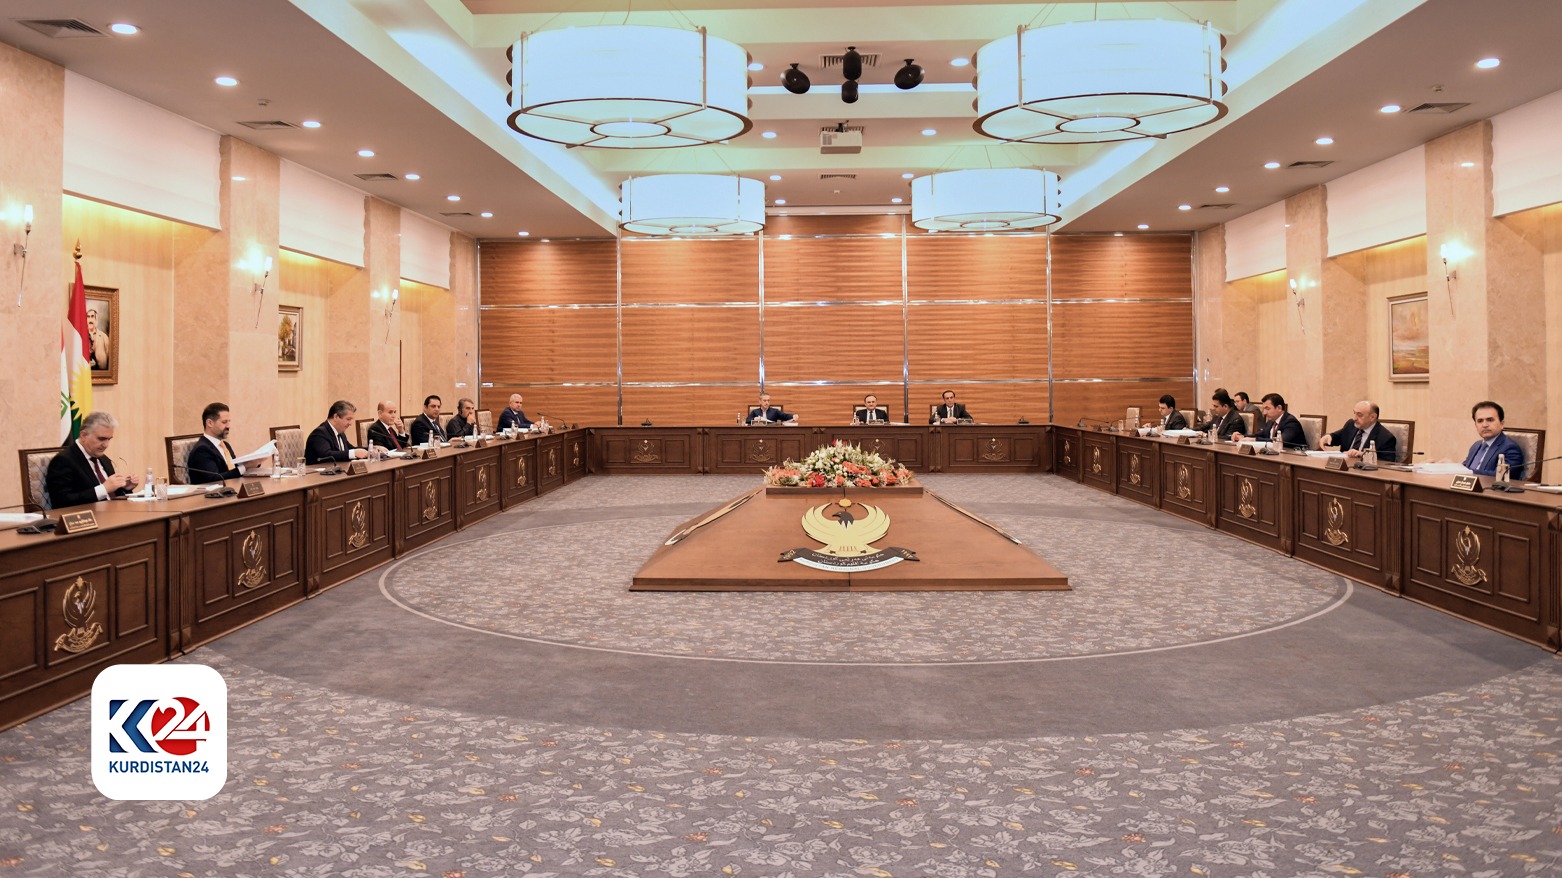 IraqiTurkish joint security and political committee to meet in August